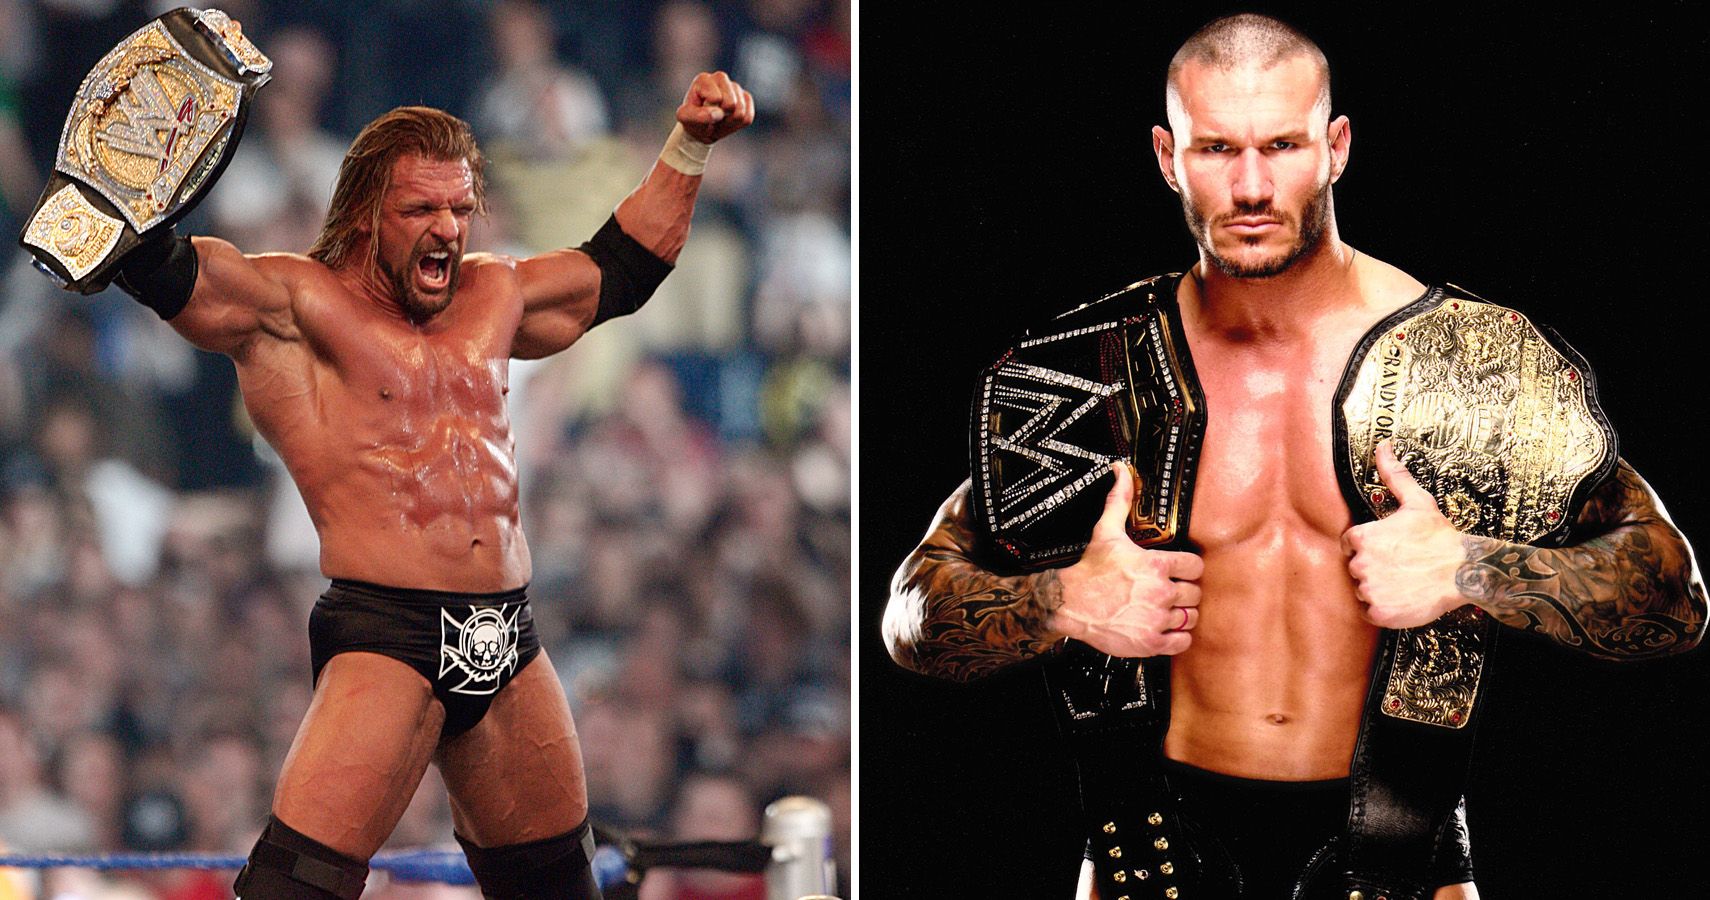 Top 15 Wrestlers With The Most PPV Title Matches In WWE History